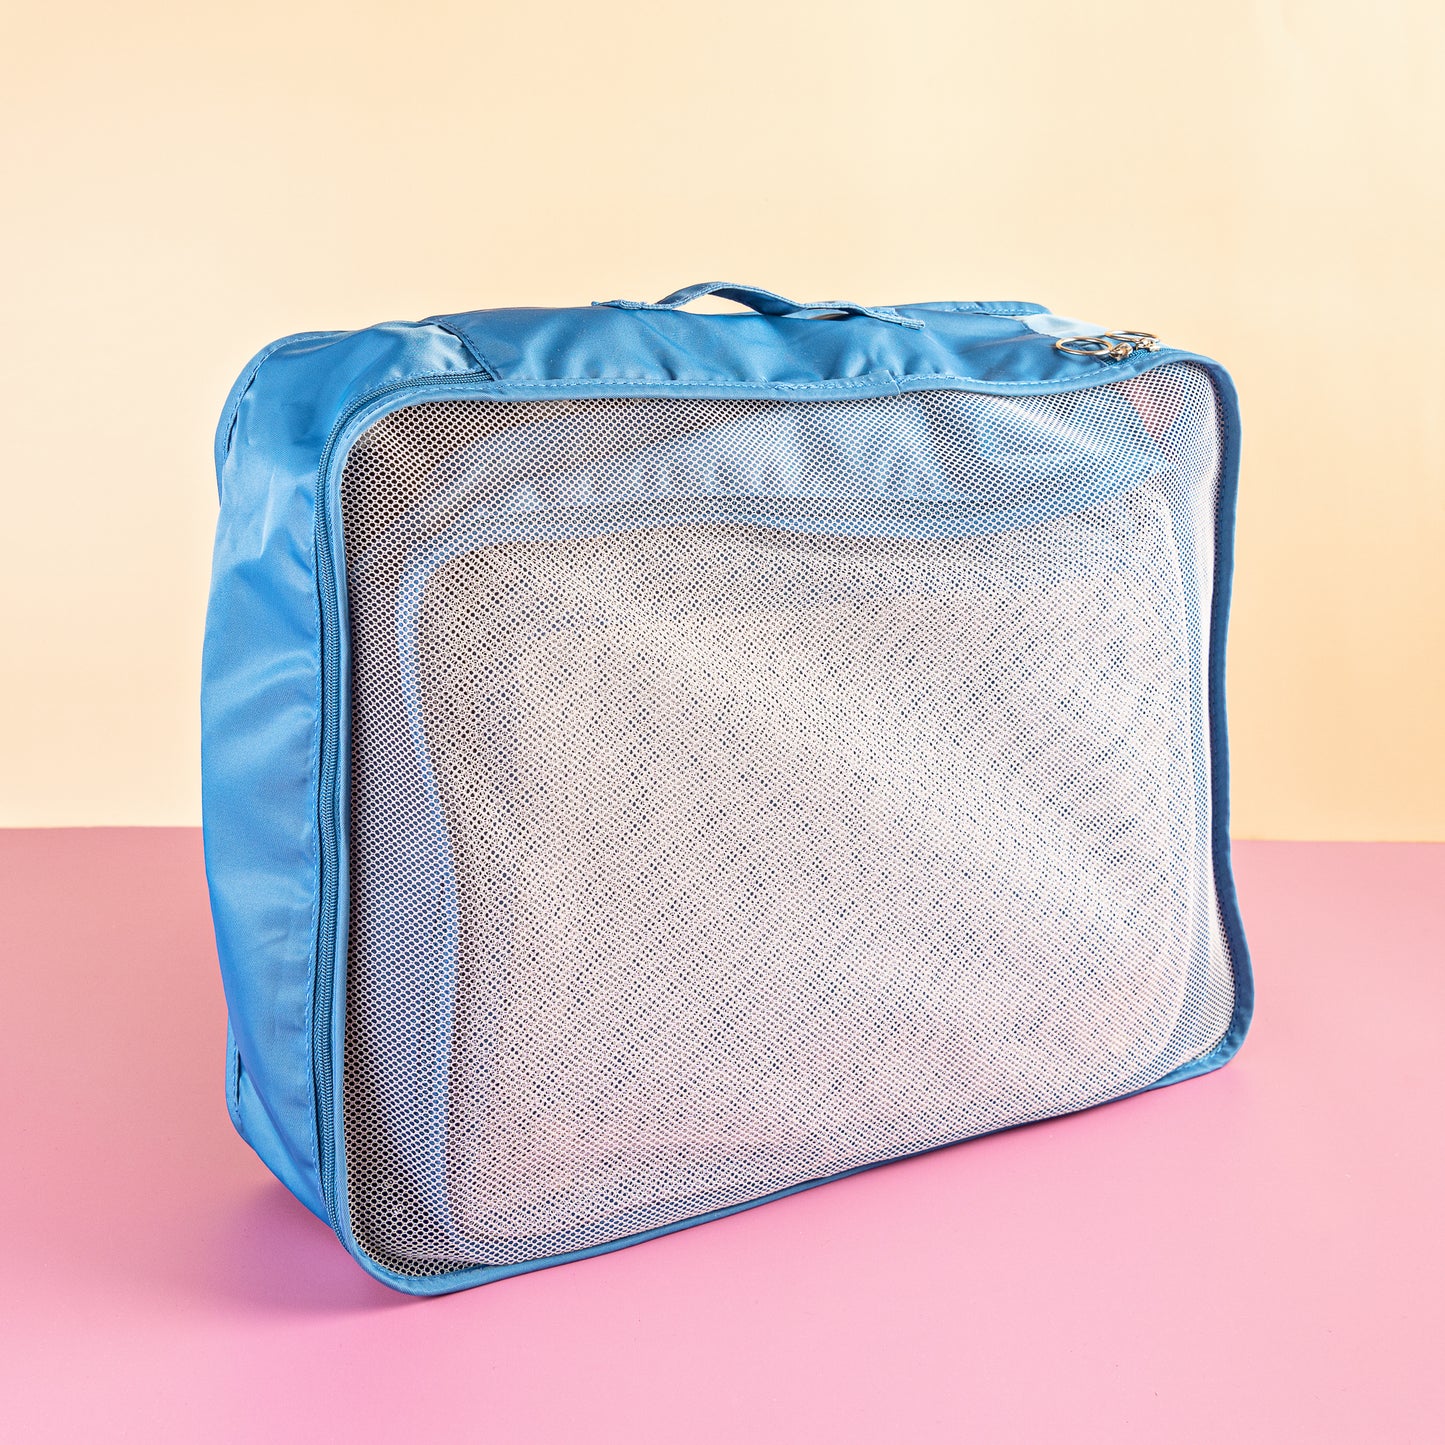 blue packing cubes on a pink and yellow background